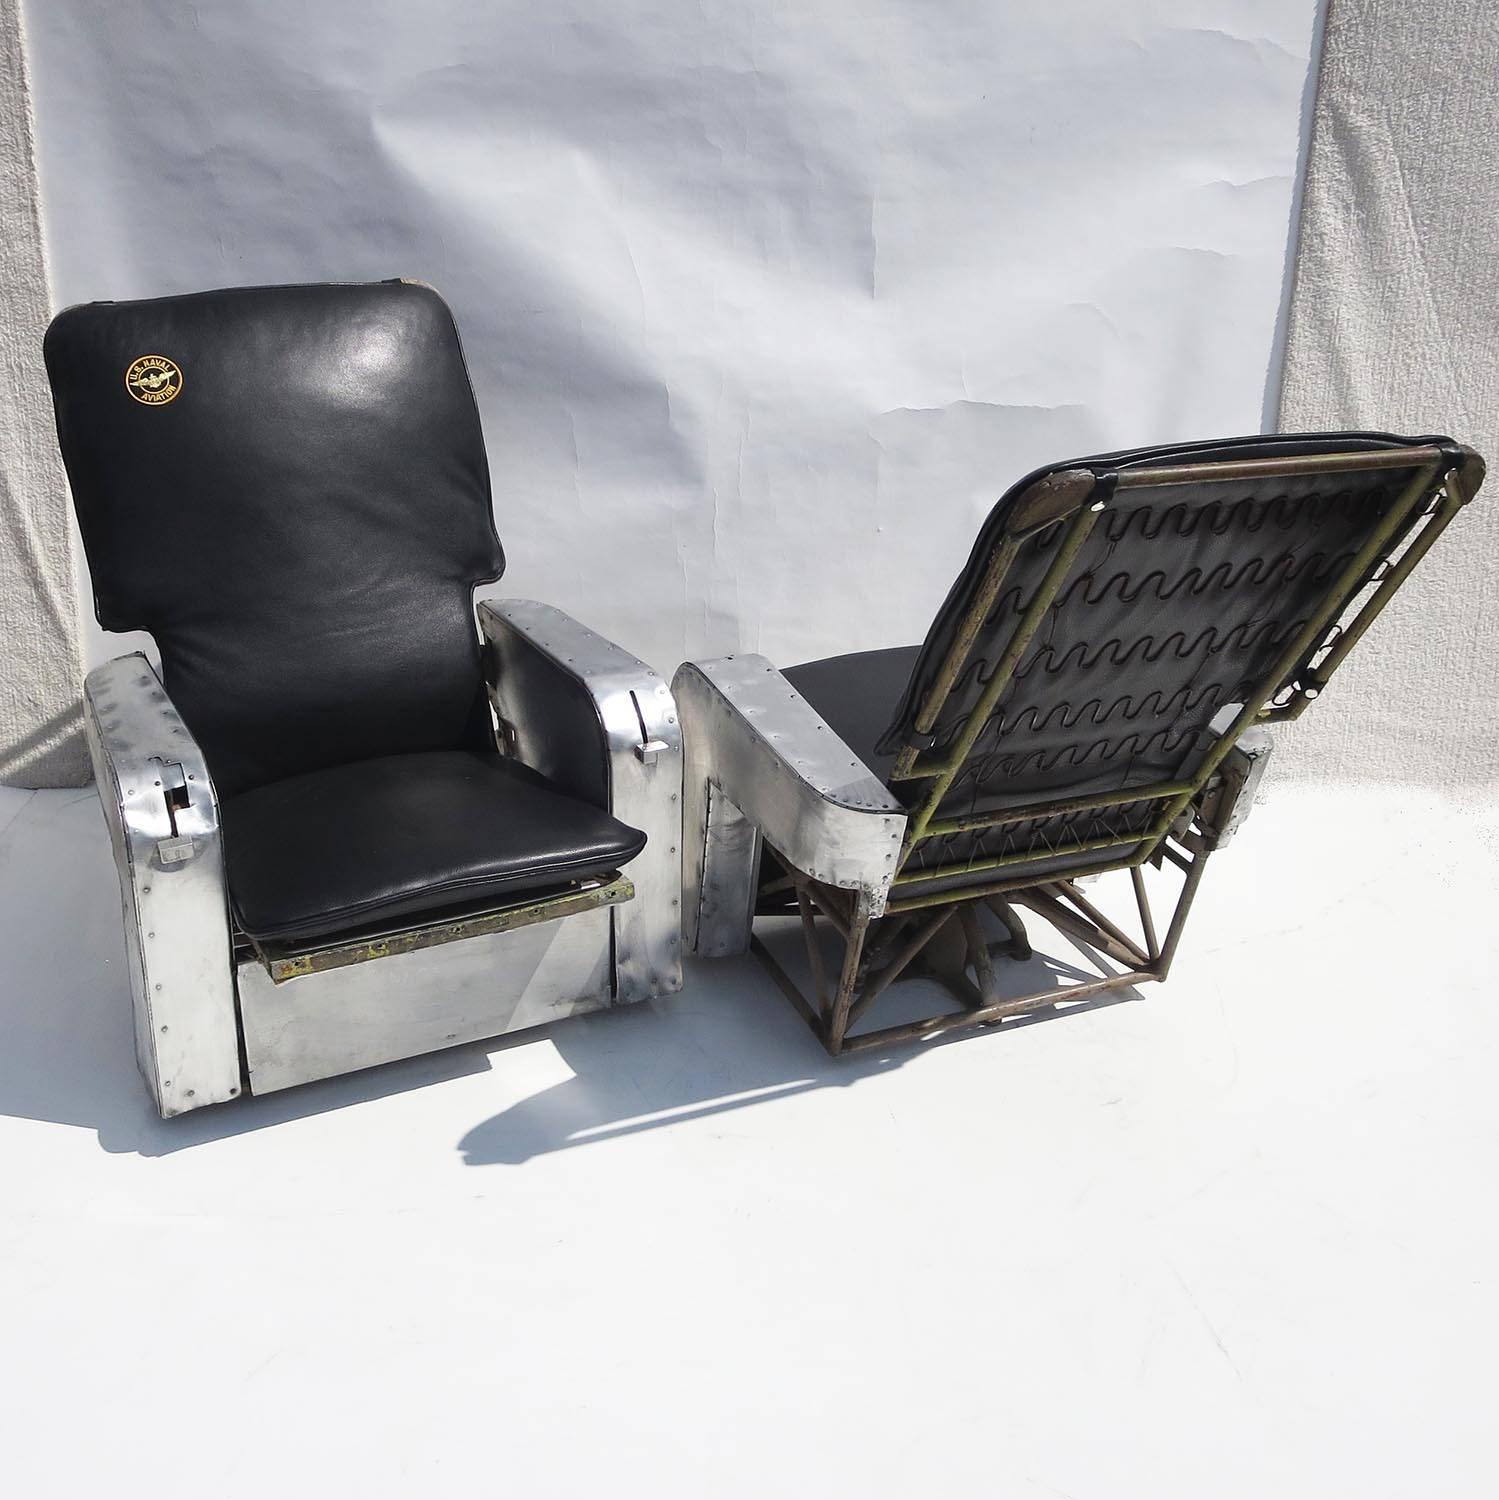 These fantastic chairs came from the interior of an airplane. There are two levers on the arms, recline and swivel. By pulling each lever, one can recline the seat back, or release the locked base to allow a turning action. The chairs have a